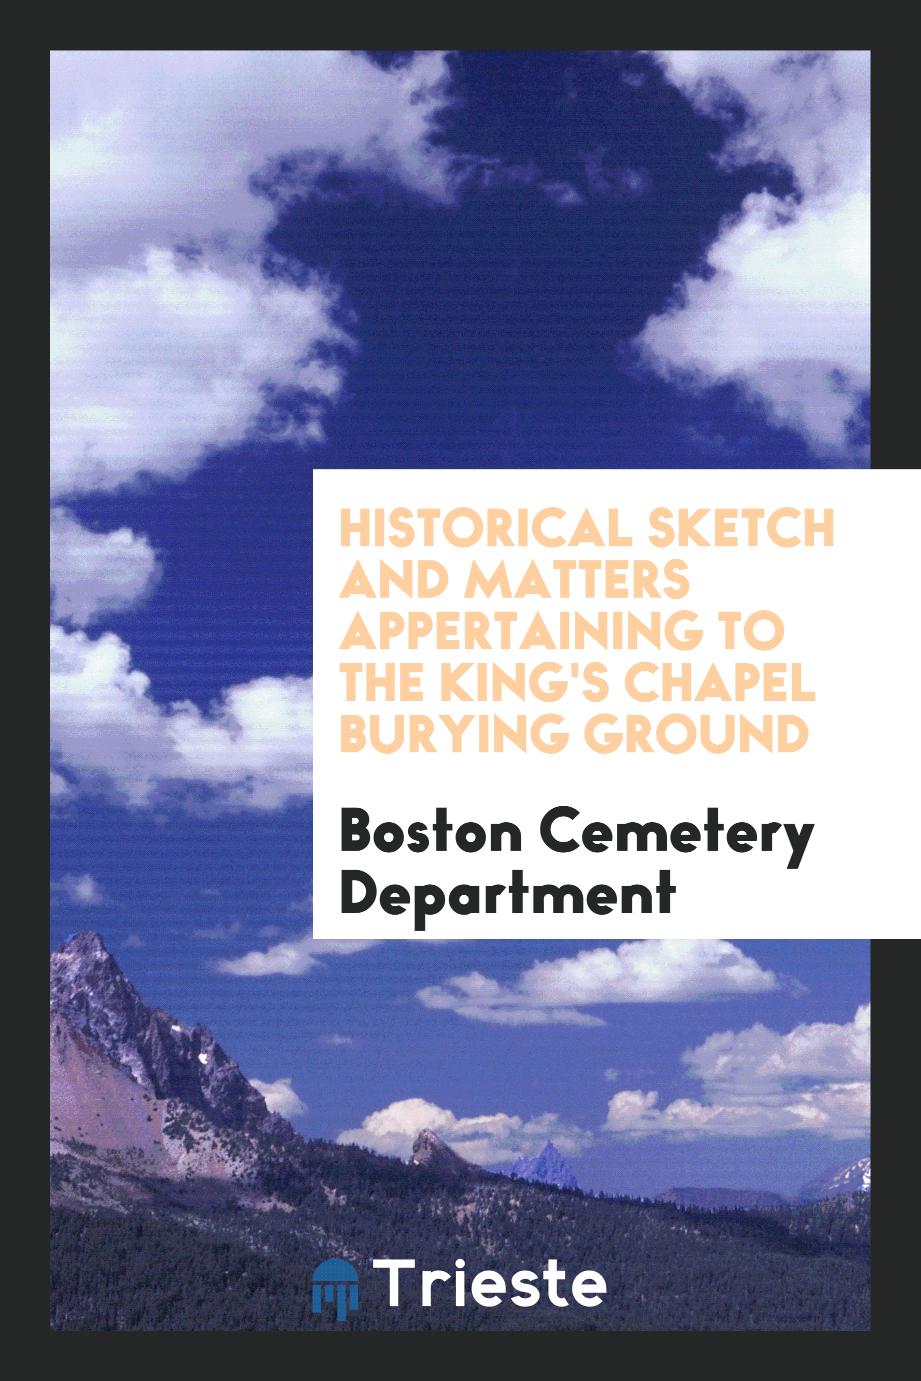 Historical sketch and matters appertaining to the King's Chapel Burying Ground